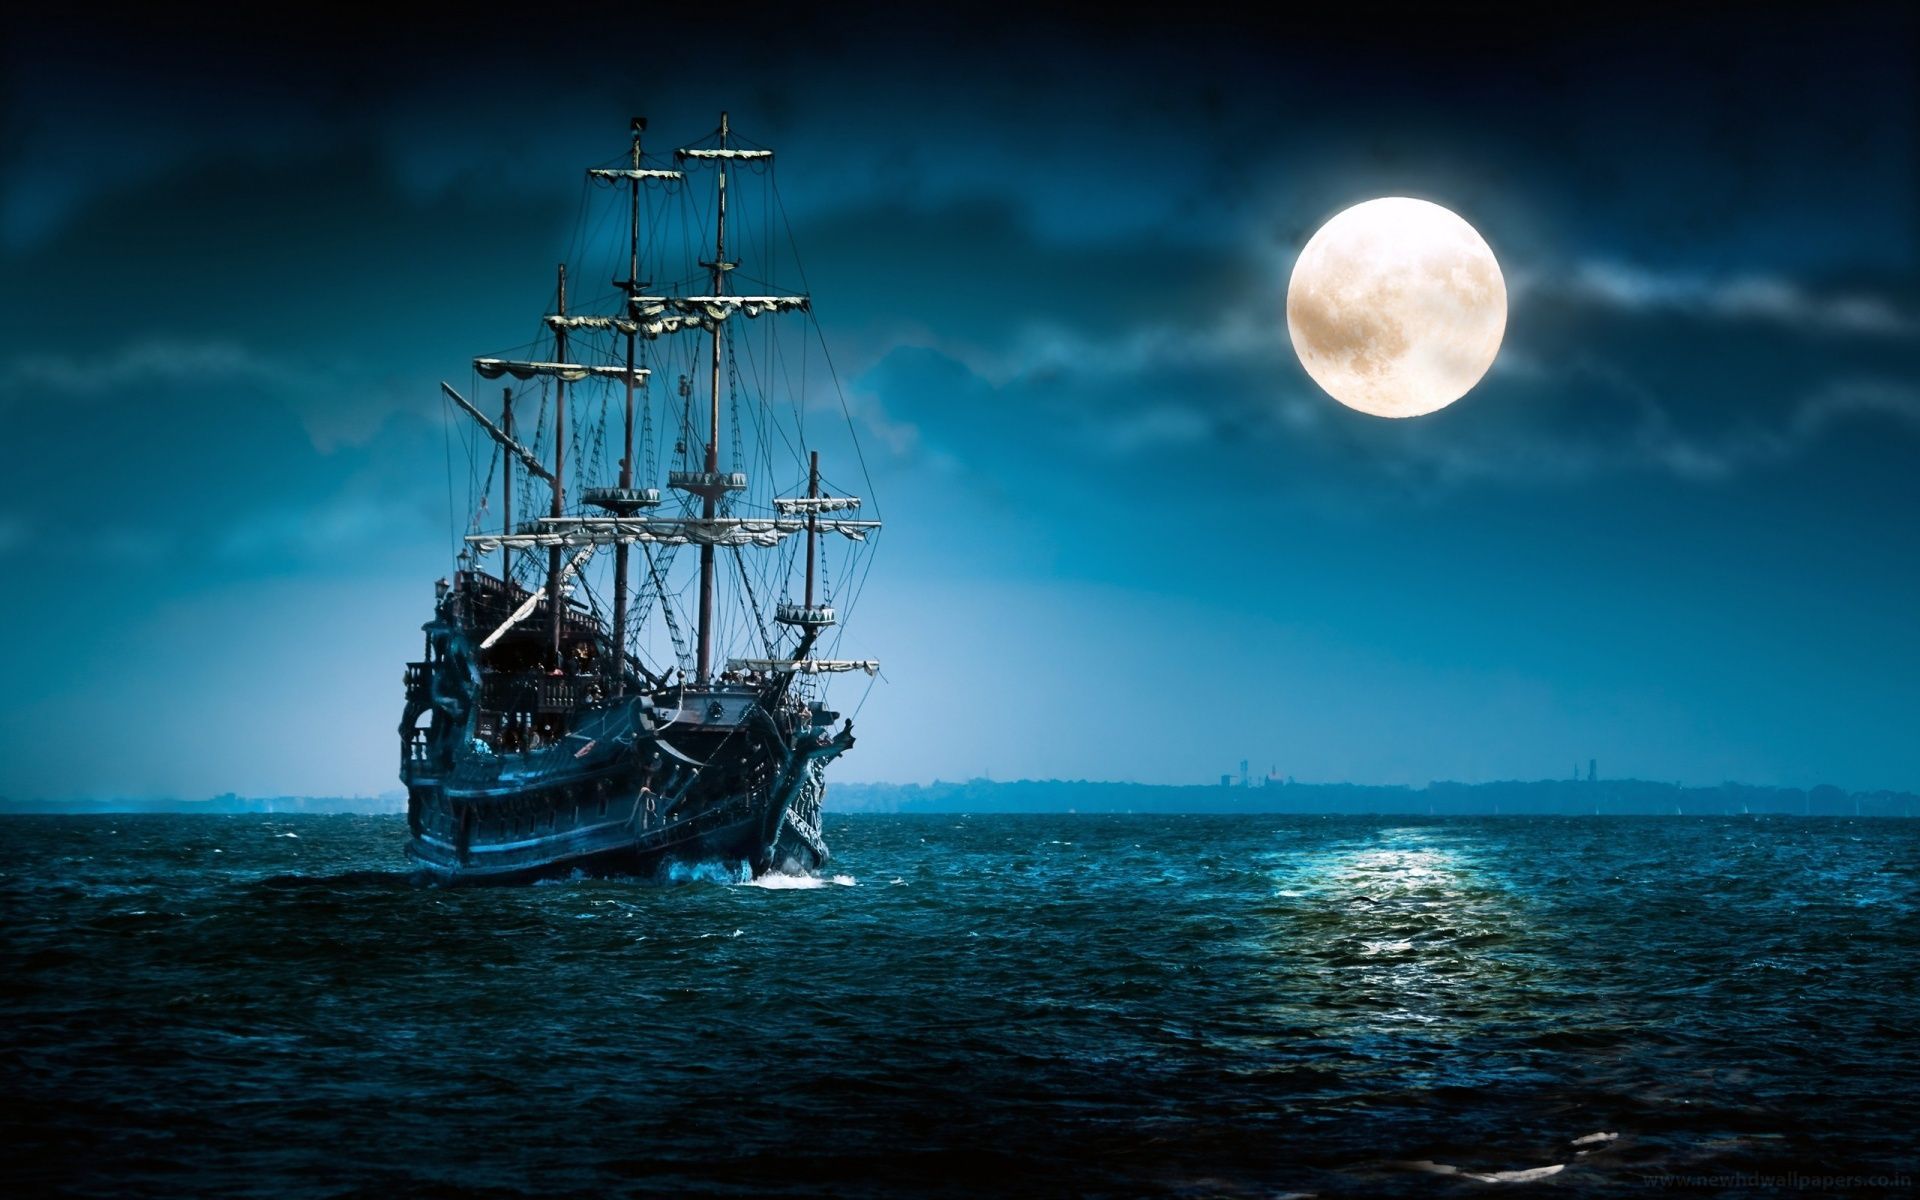 Ship sailing in the night | Wallpapers | Pinterest | Pirate Ships ...